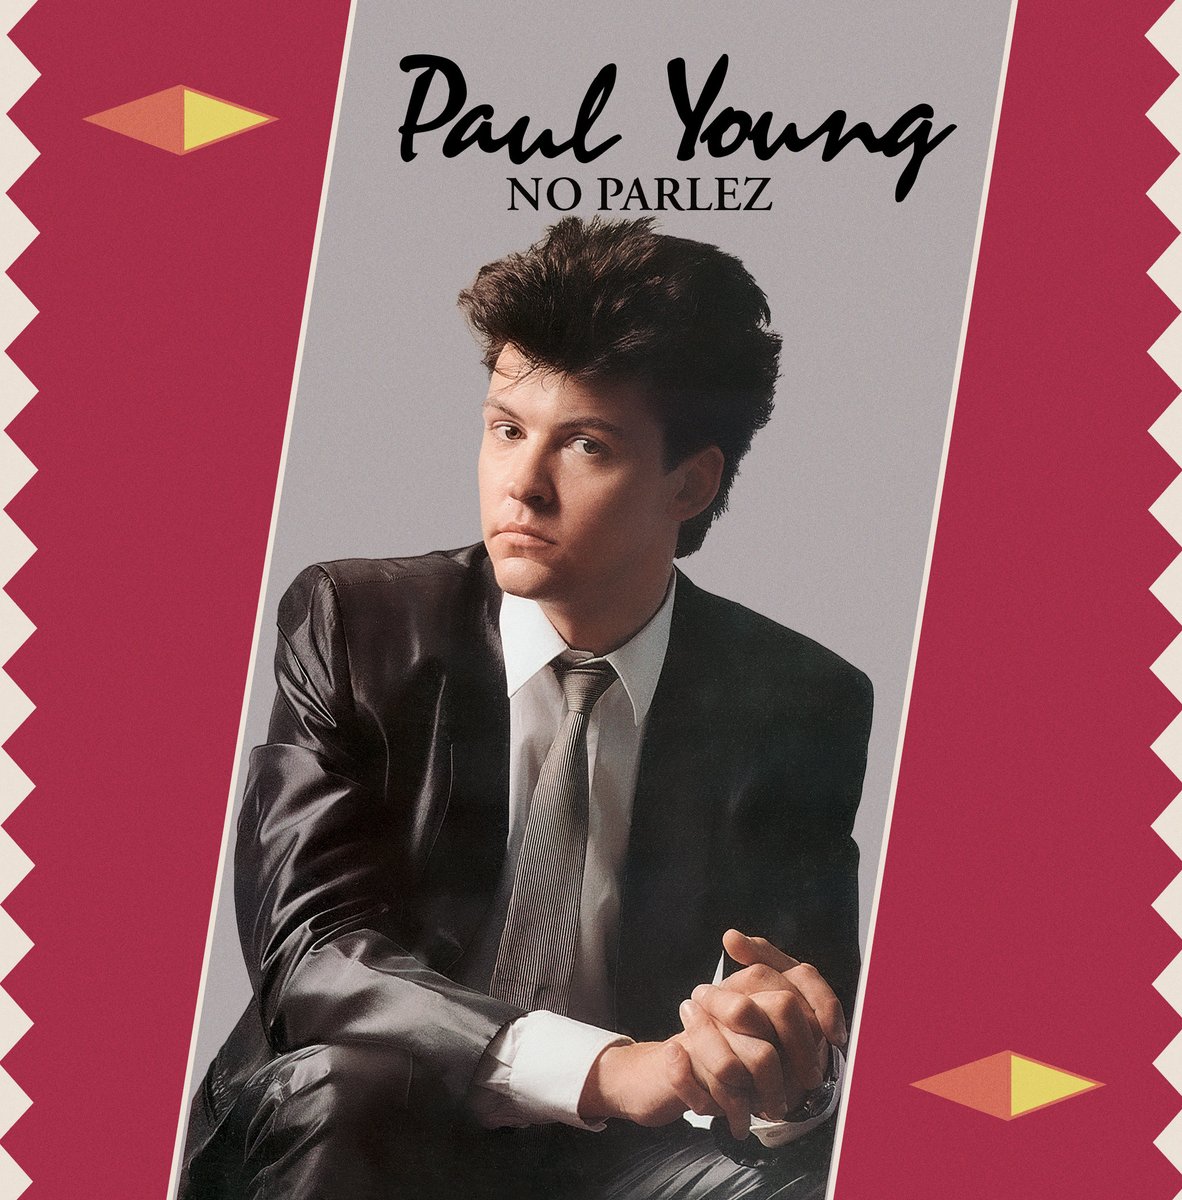 'Contrary to its latter-day reputation as an album no one wants, 'No Parlez' is an album more people in 2024 should hear'. Alexis Petridis on @PaulYoungParlez's 1983 solo debut > bit.ly/49QJomf